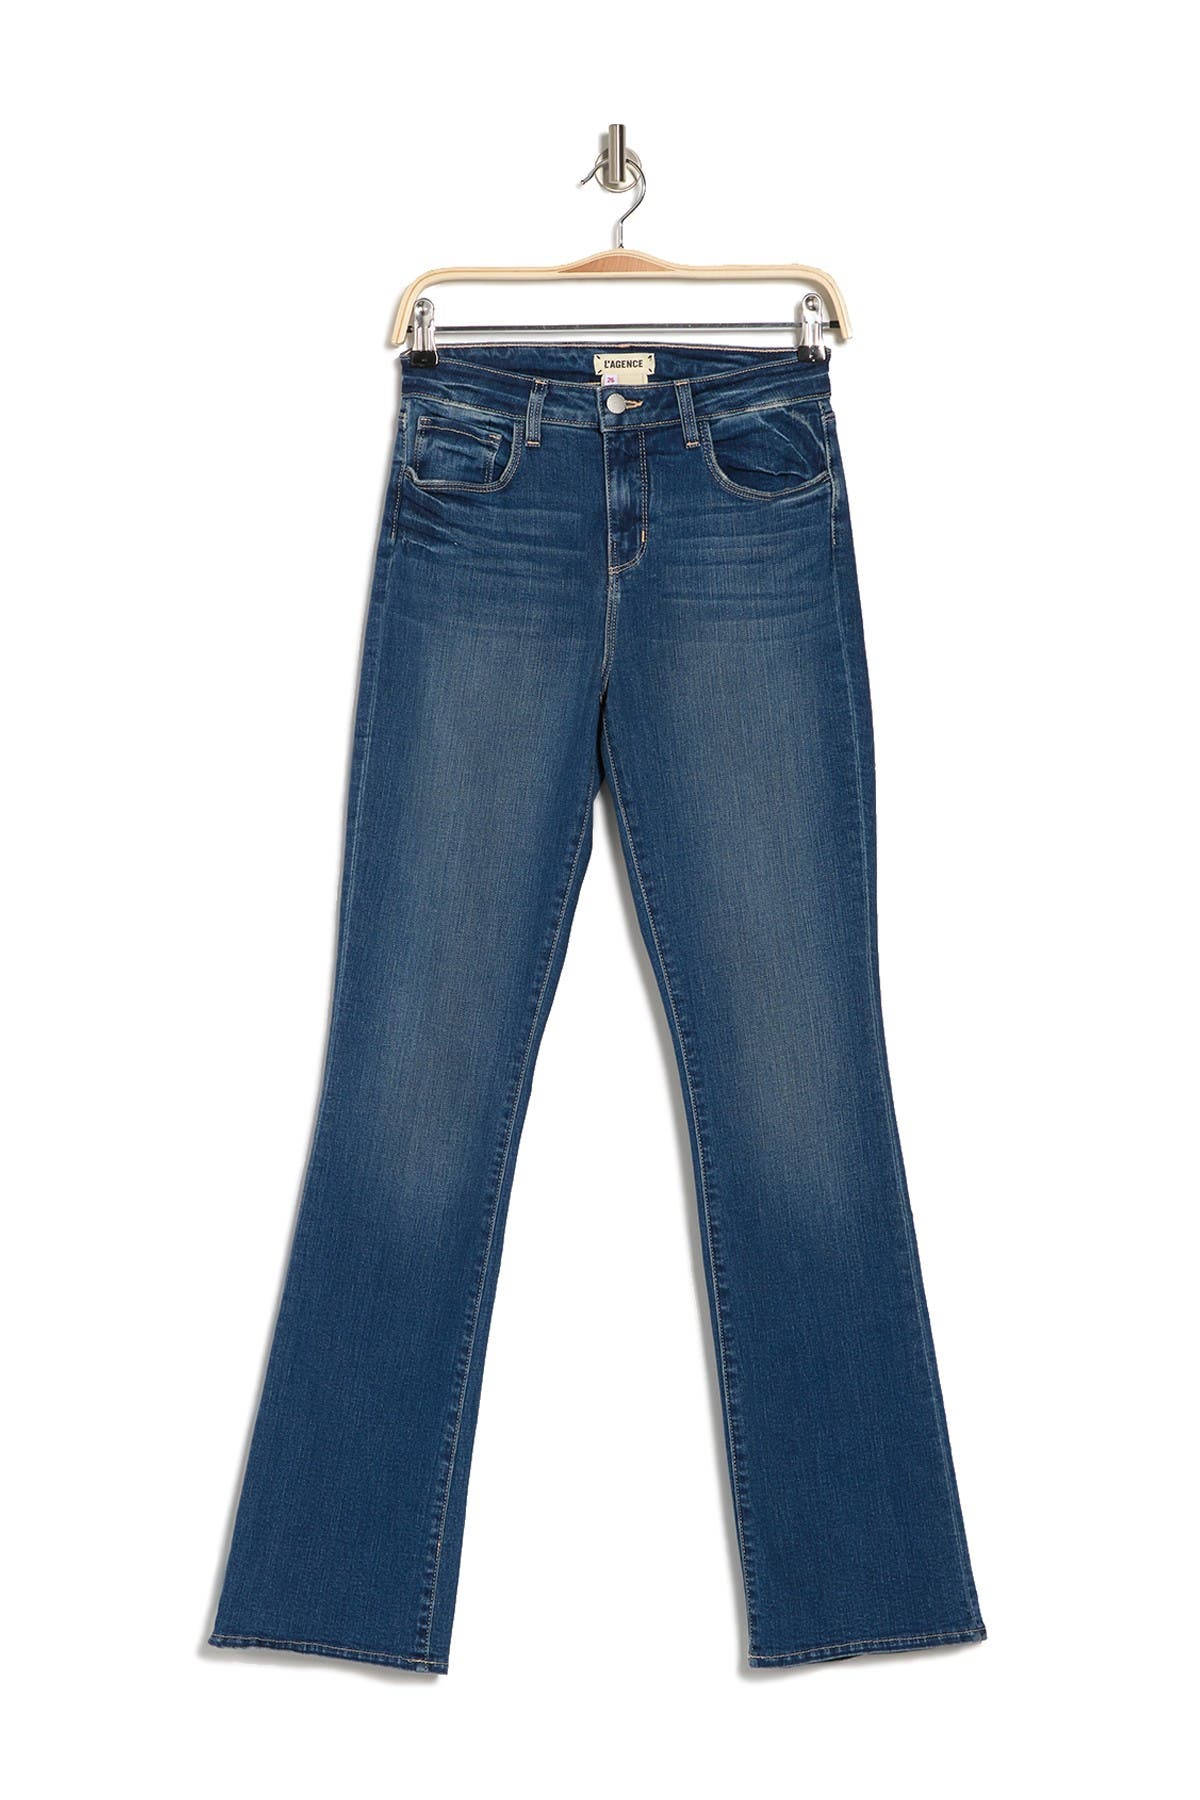 L Agence L'agence Oriana Straight Leg Jeans In Manchester